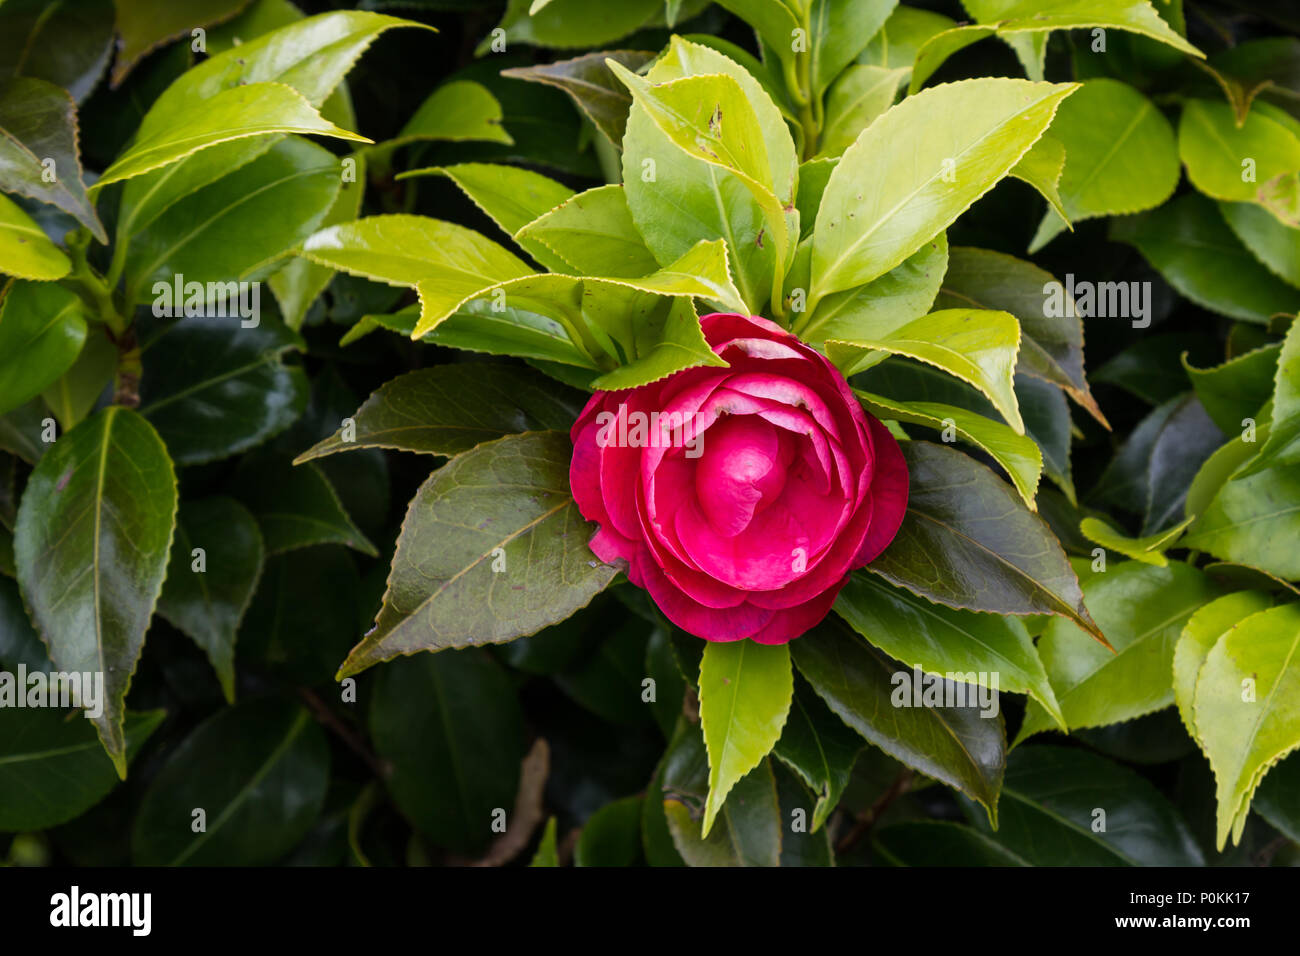 Full blossom of a red camellia flower on a bush with dark green a fresh new light grean leaves. Stock Photo